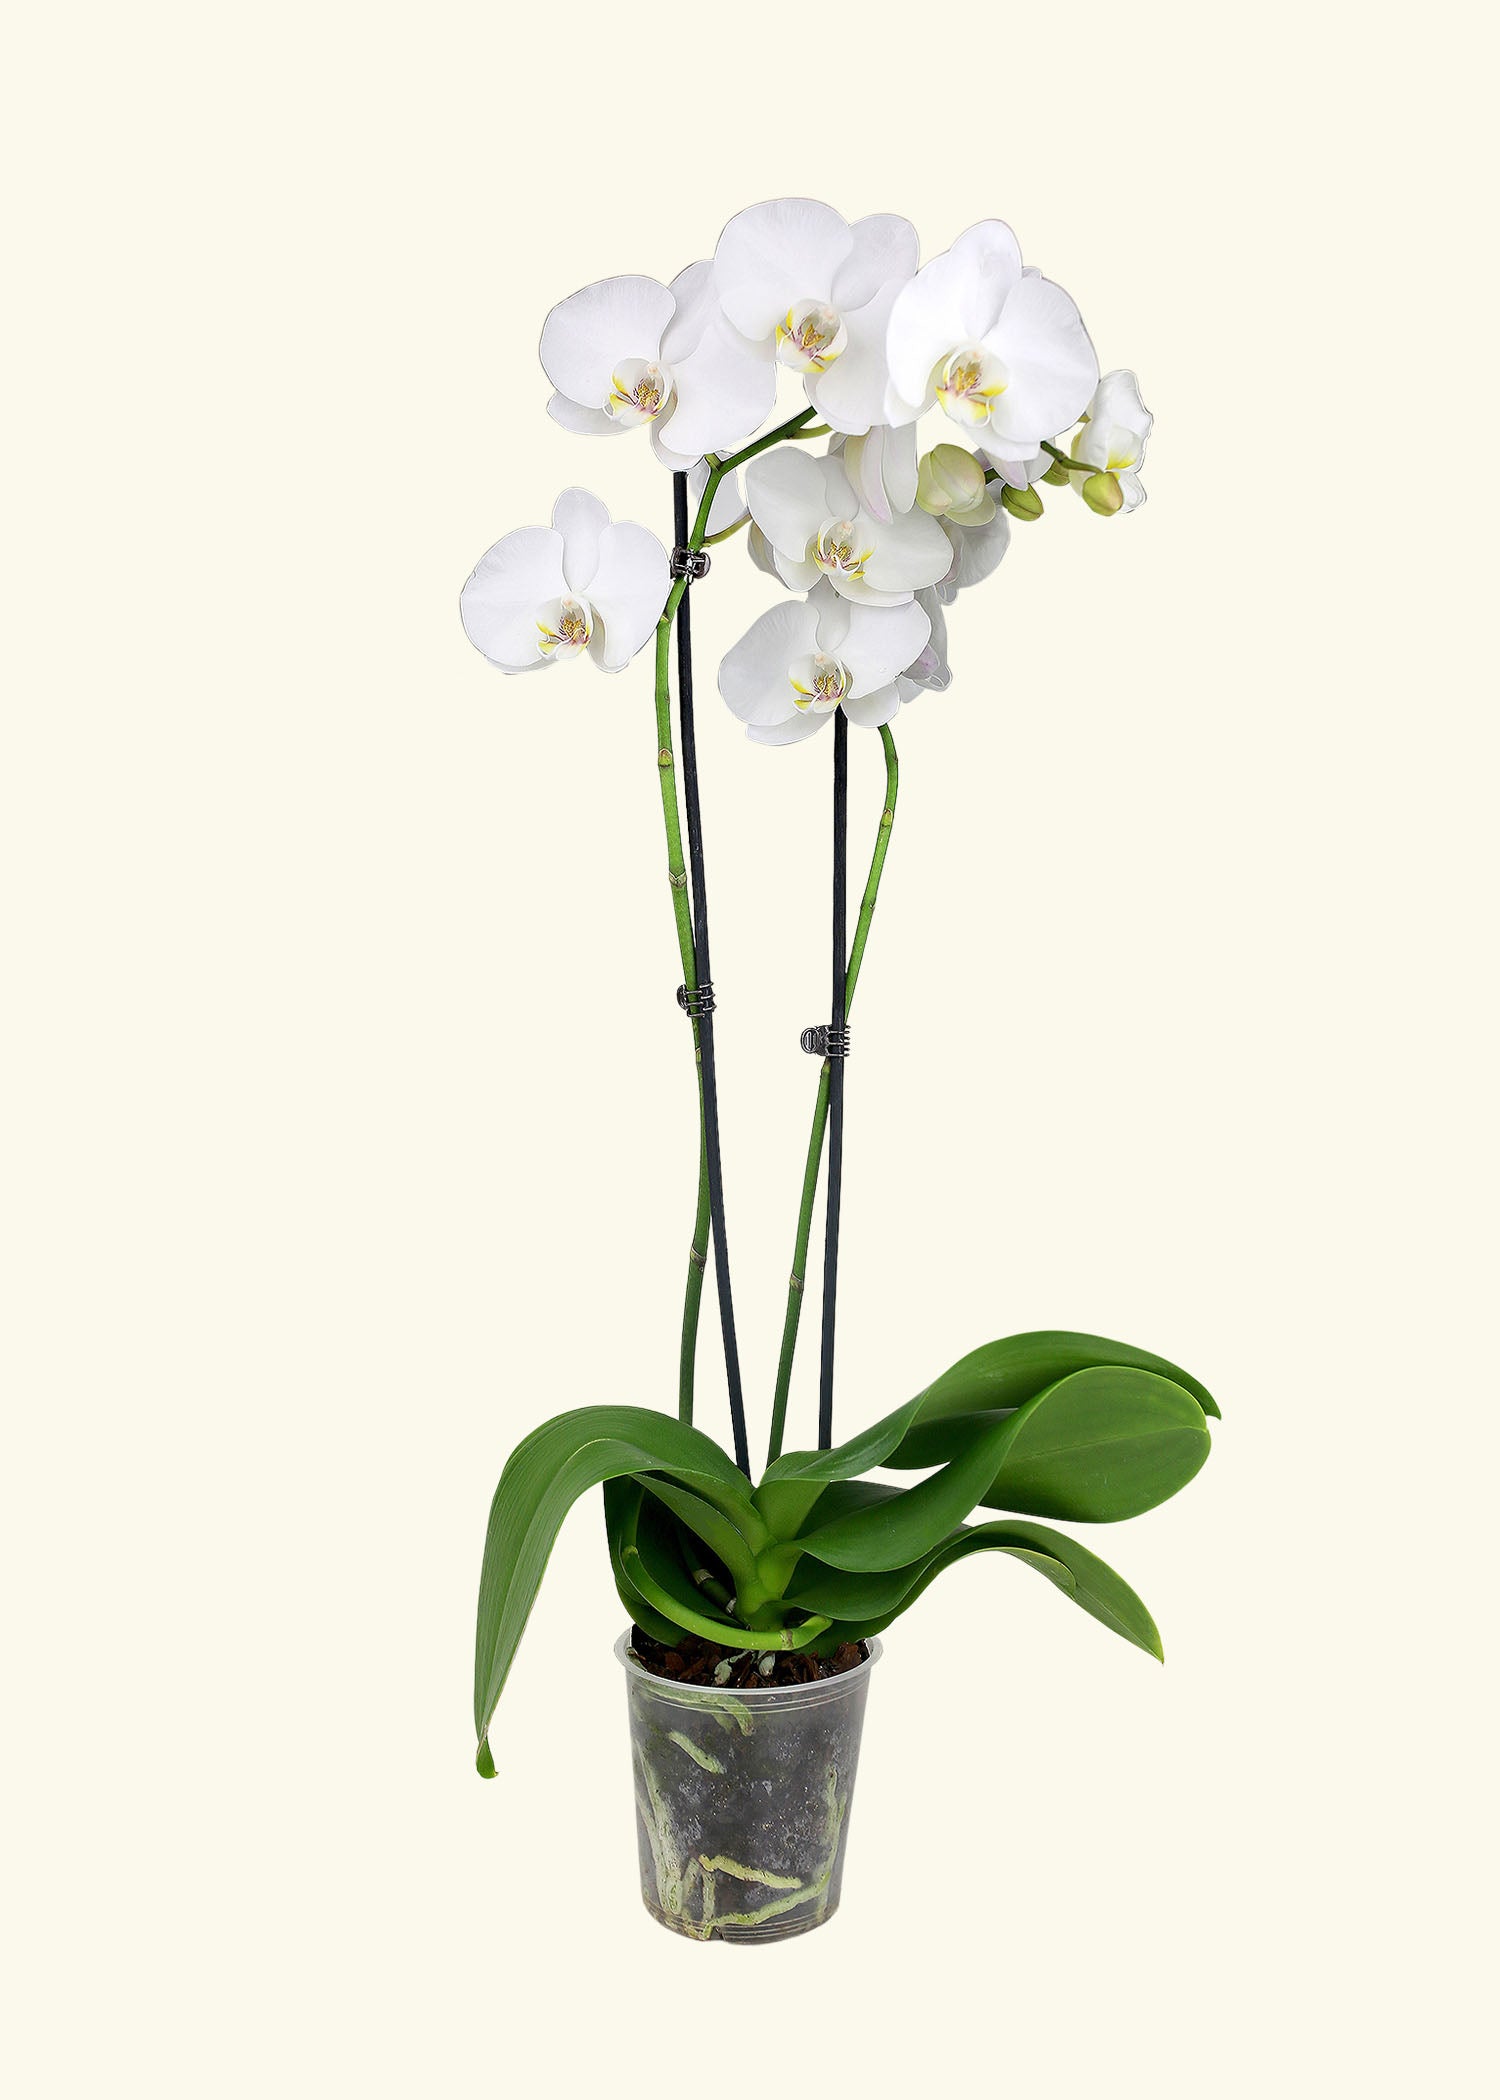 Small White Orchid in a grow pot.